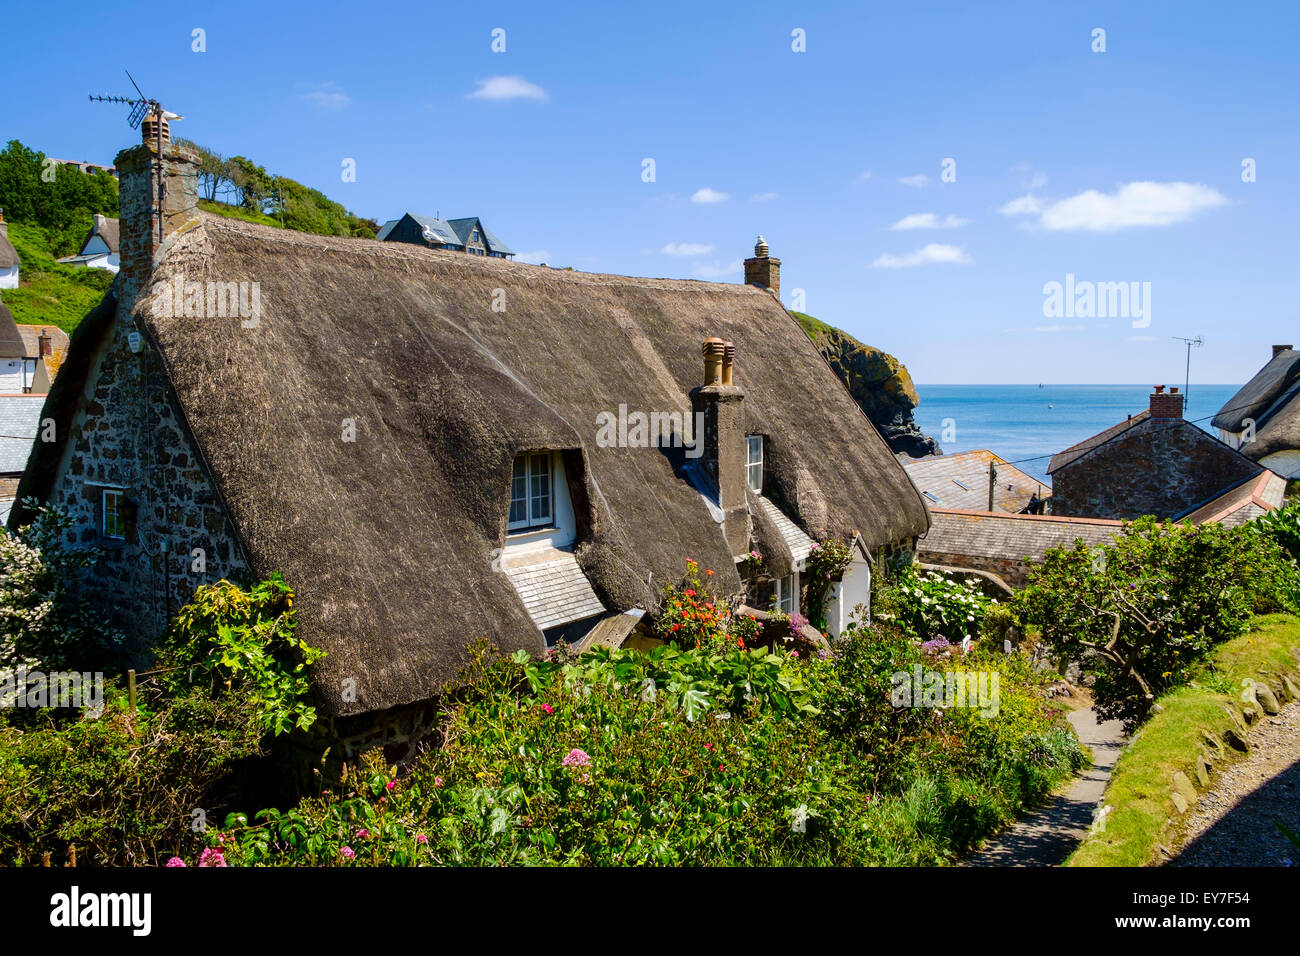 Thatched cottage in the tiny fishing village of Cadgwith, Lizard Peninsula, Cornwall, England, UK Stock Photo